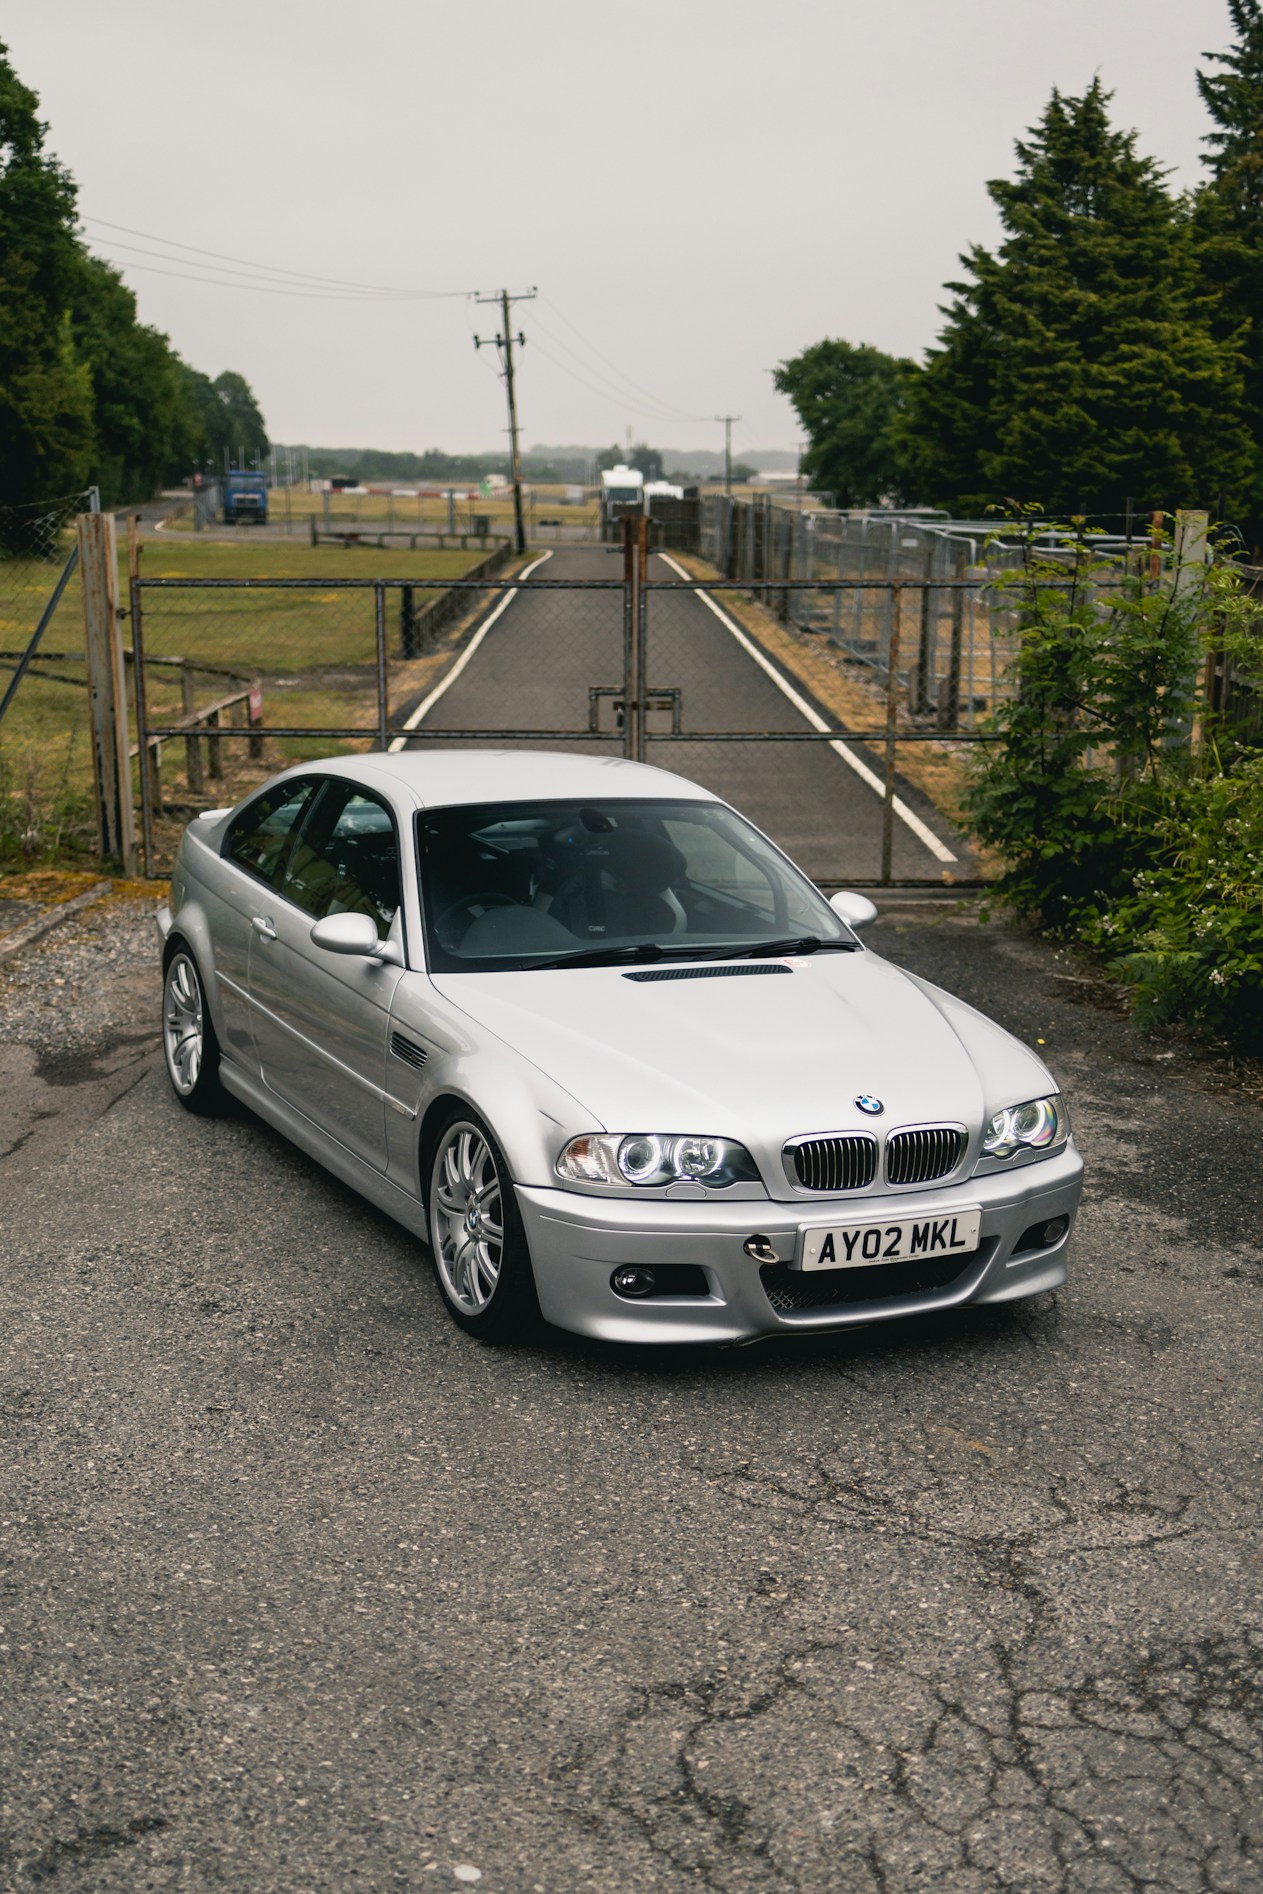 2002 BMW (E46) M3 for sale by auction in Lichfield, Staffordshire